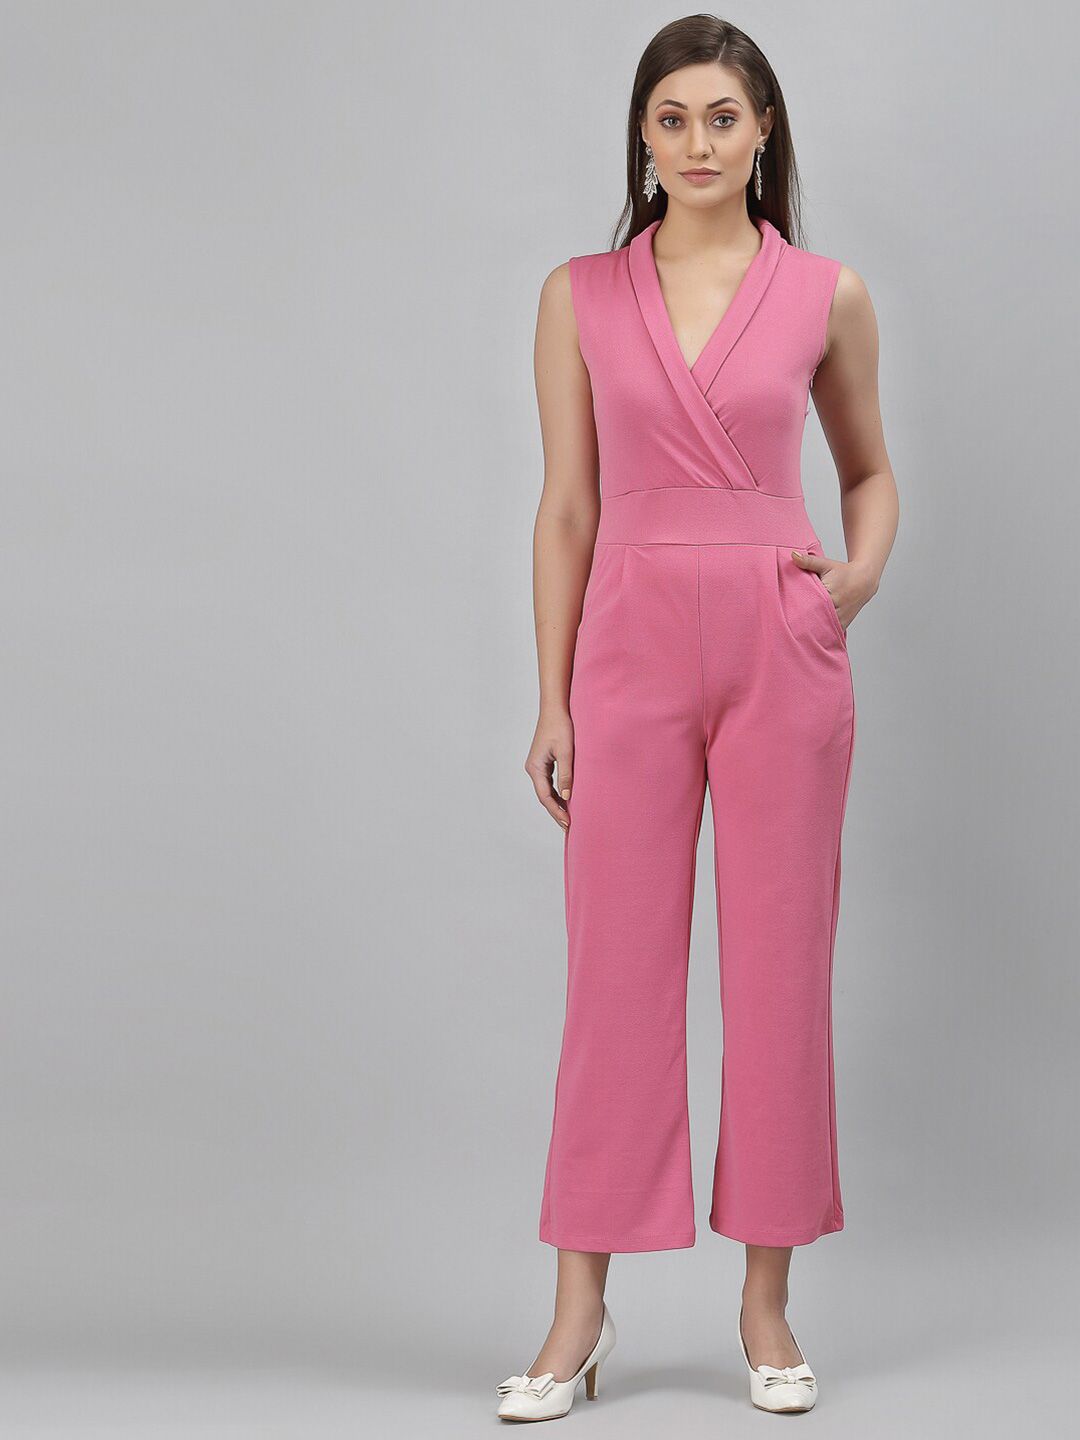 Selvia Pink Sleeveless Culotte Jumpsuit Price in India